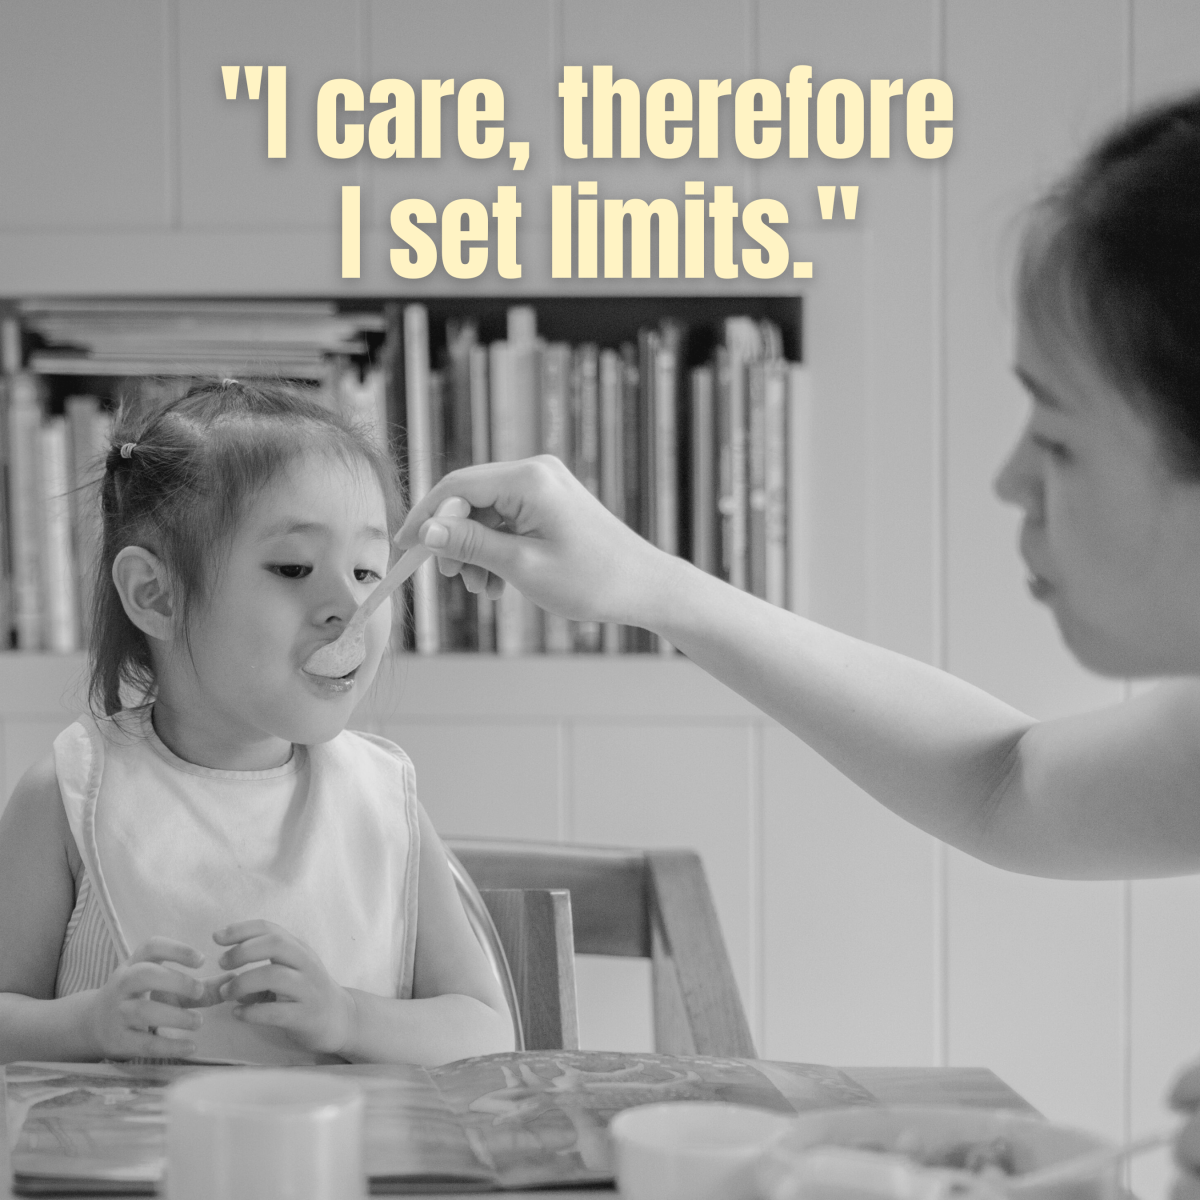 An authoritative parent sets rules and limits because they care.